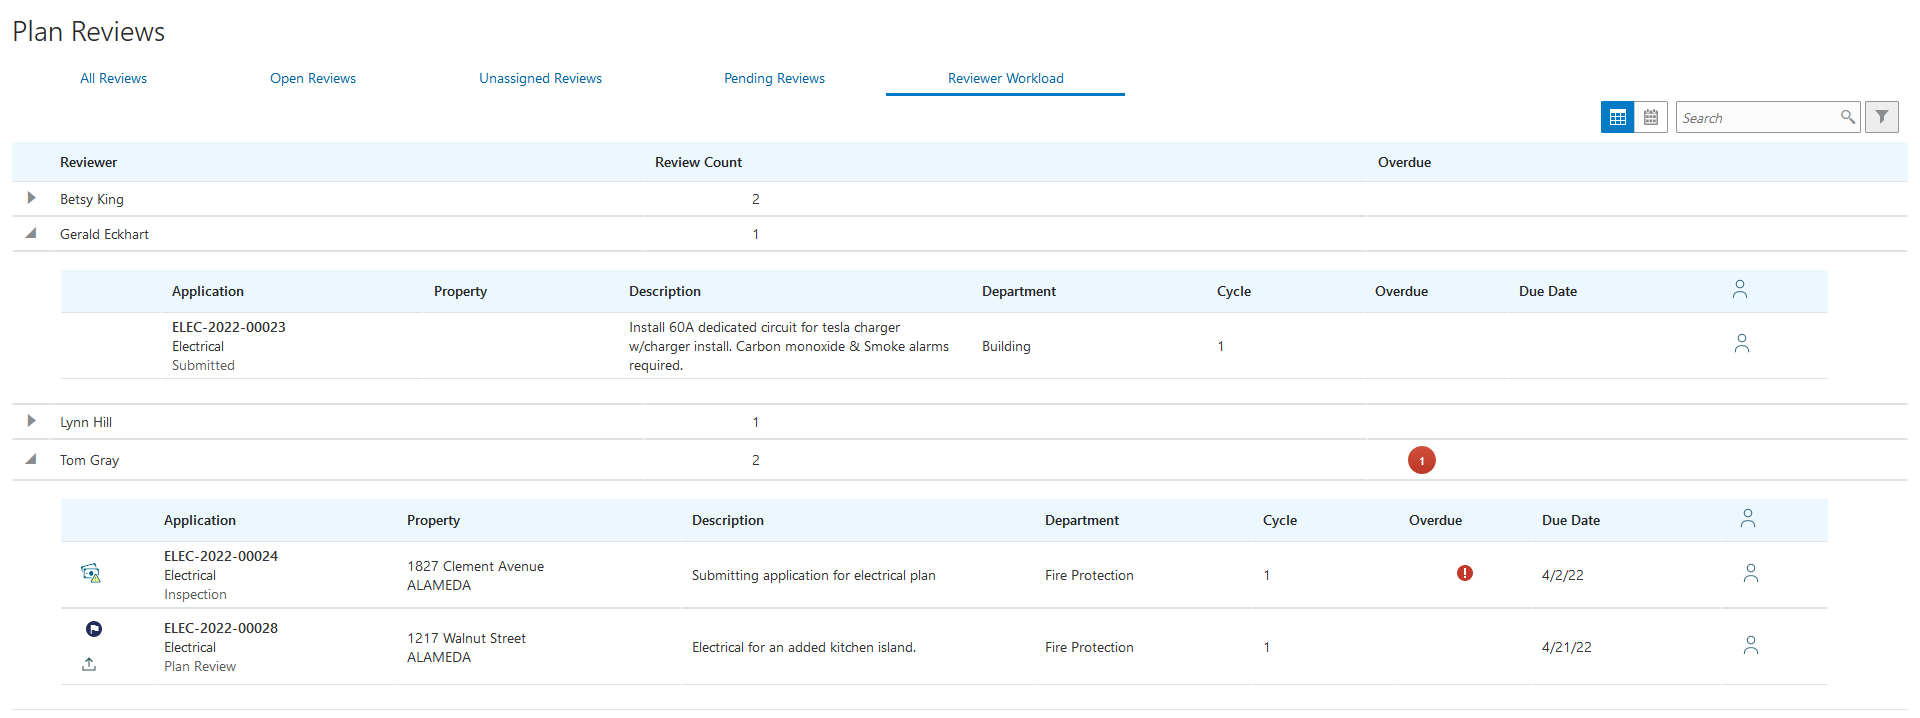 Grid view of the Plan Reviews - Reviewer Workload page in the Plan Review Console